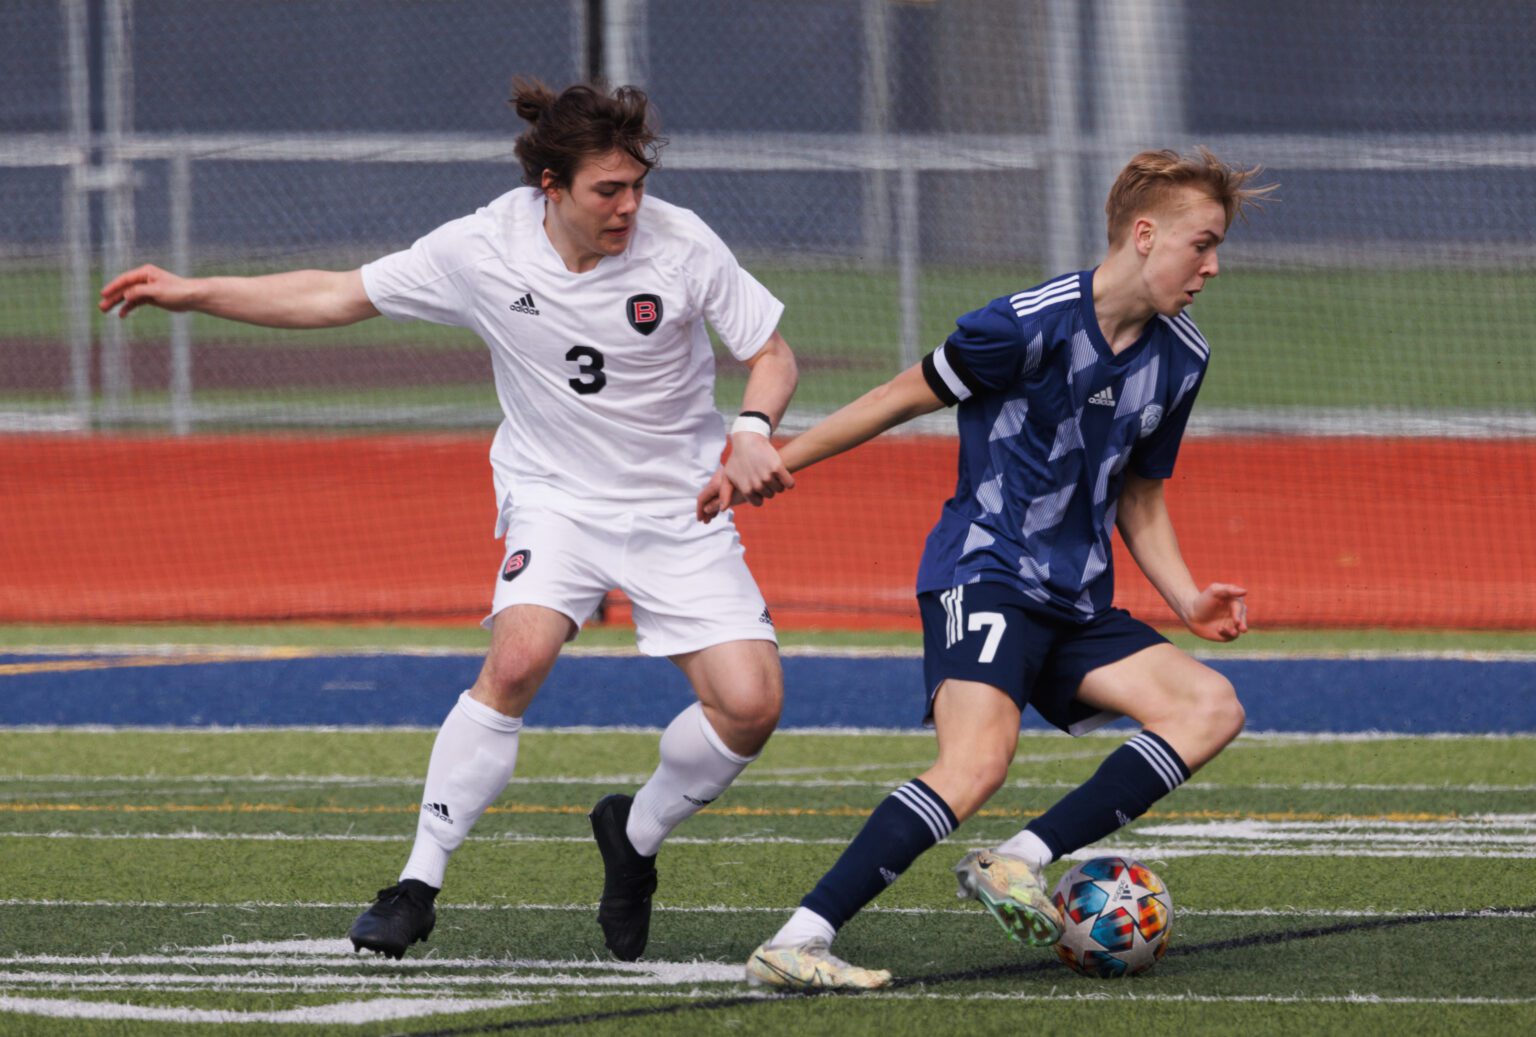 Bellingham's Lorenzo Pellecchia tries to hold back Squalicum’s Xander Koenig March 25 as the Storm beat the Bayhawks 2-0 at Squalicum High School.